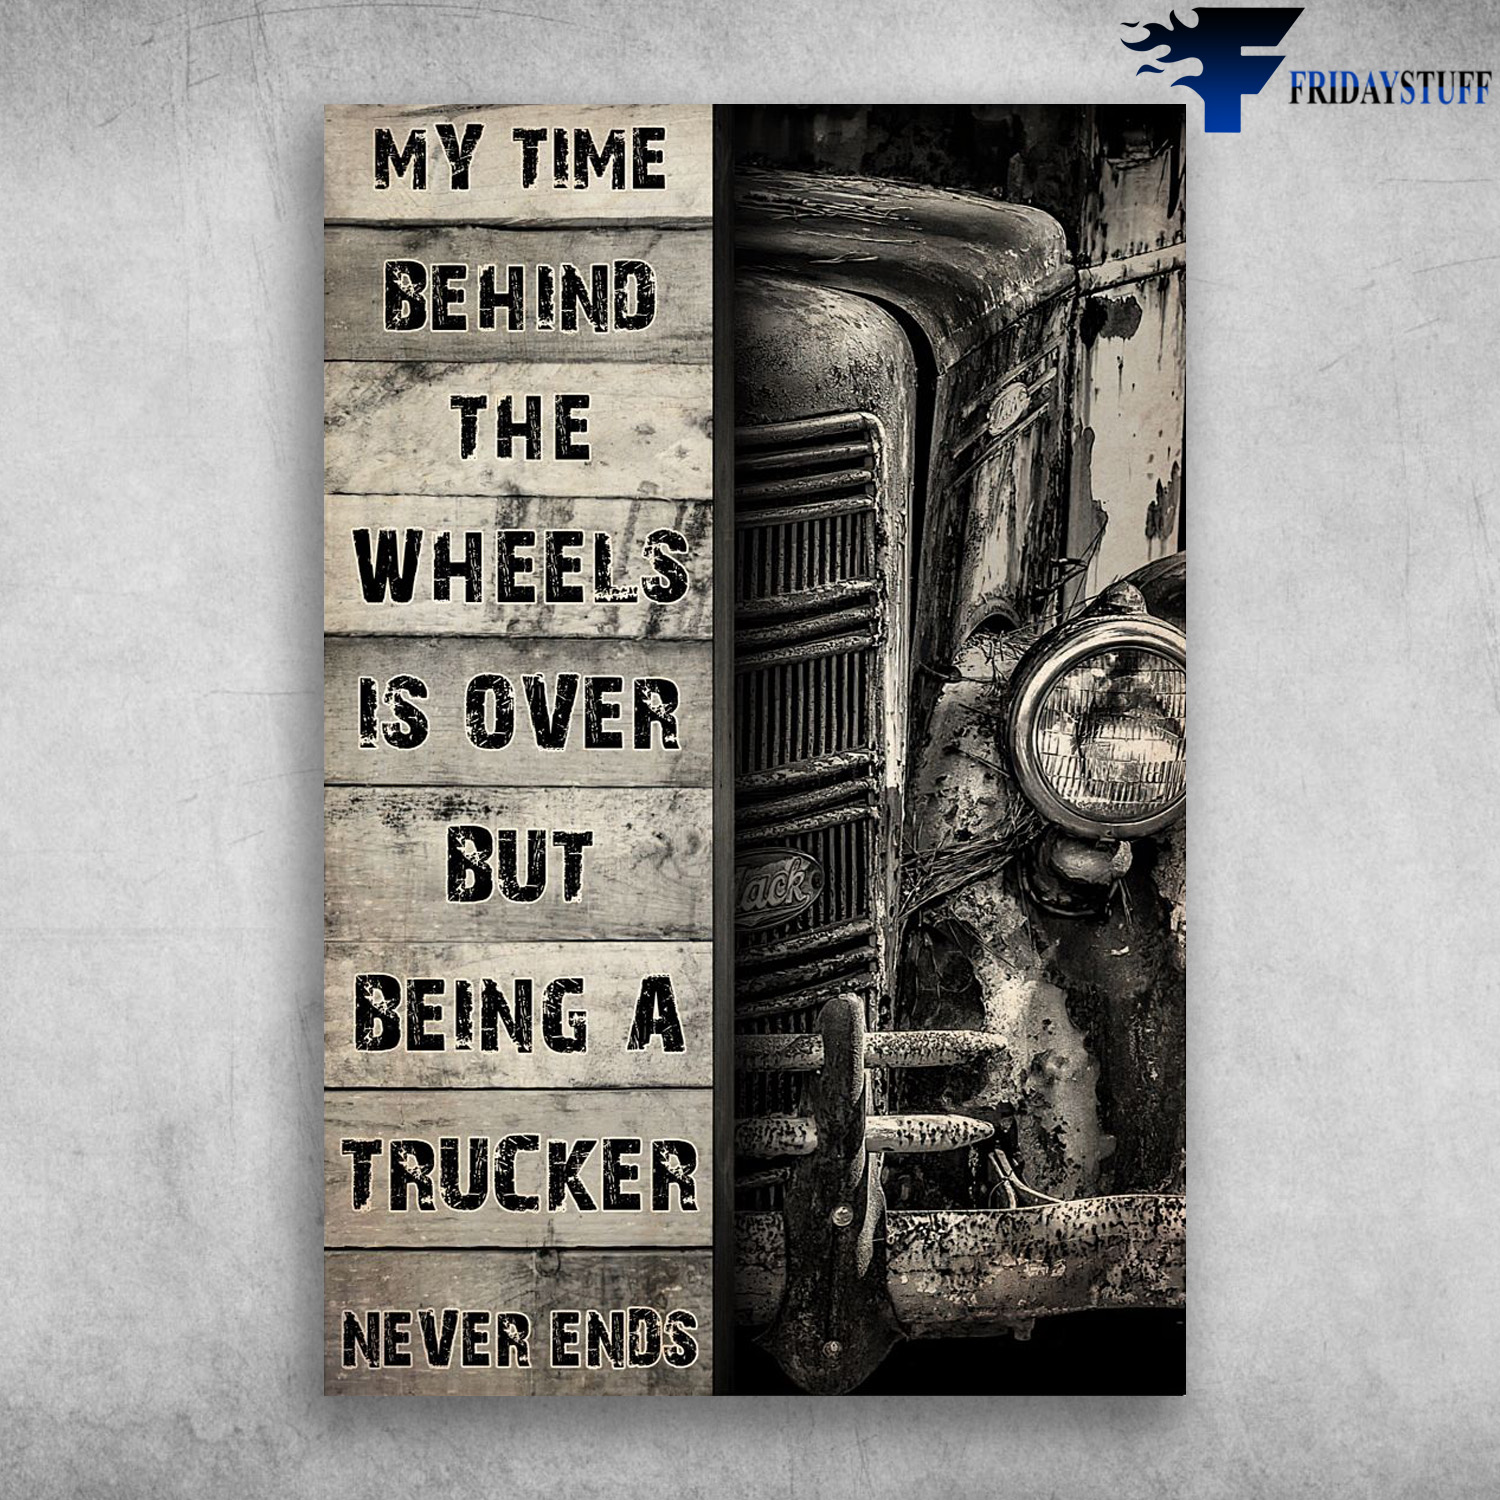 Old Truck - MyTime Hehind The Wheels Is Over, But Being A Trucker Never Ends, Hot Rod